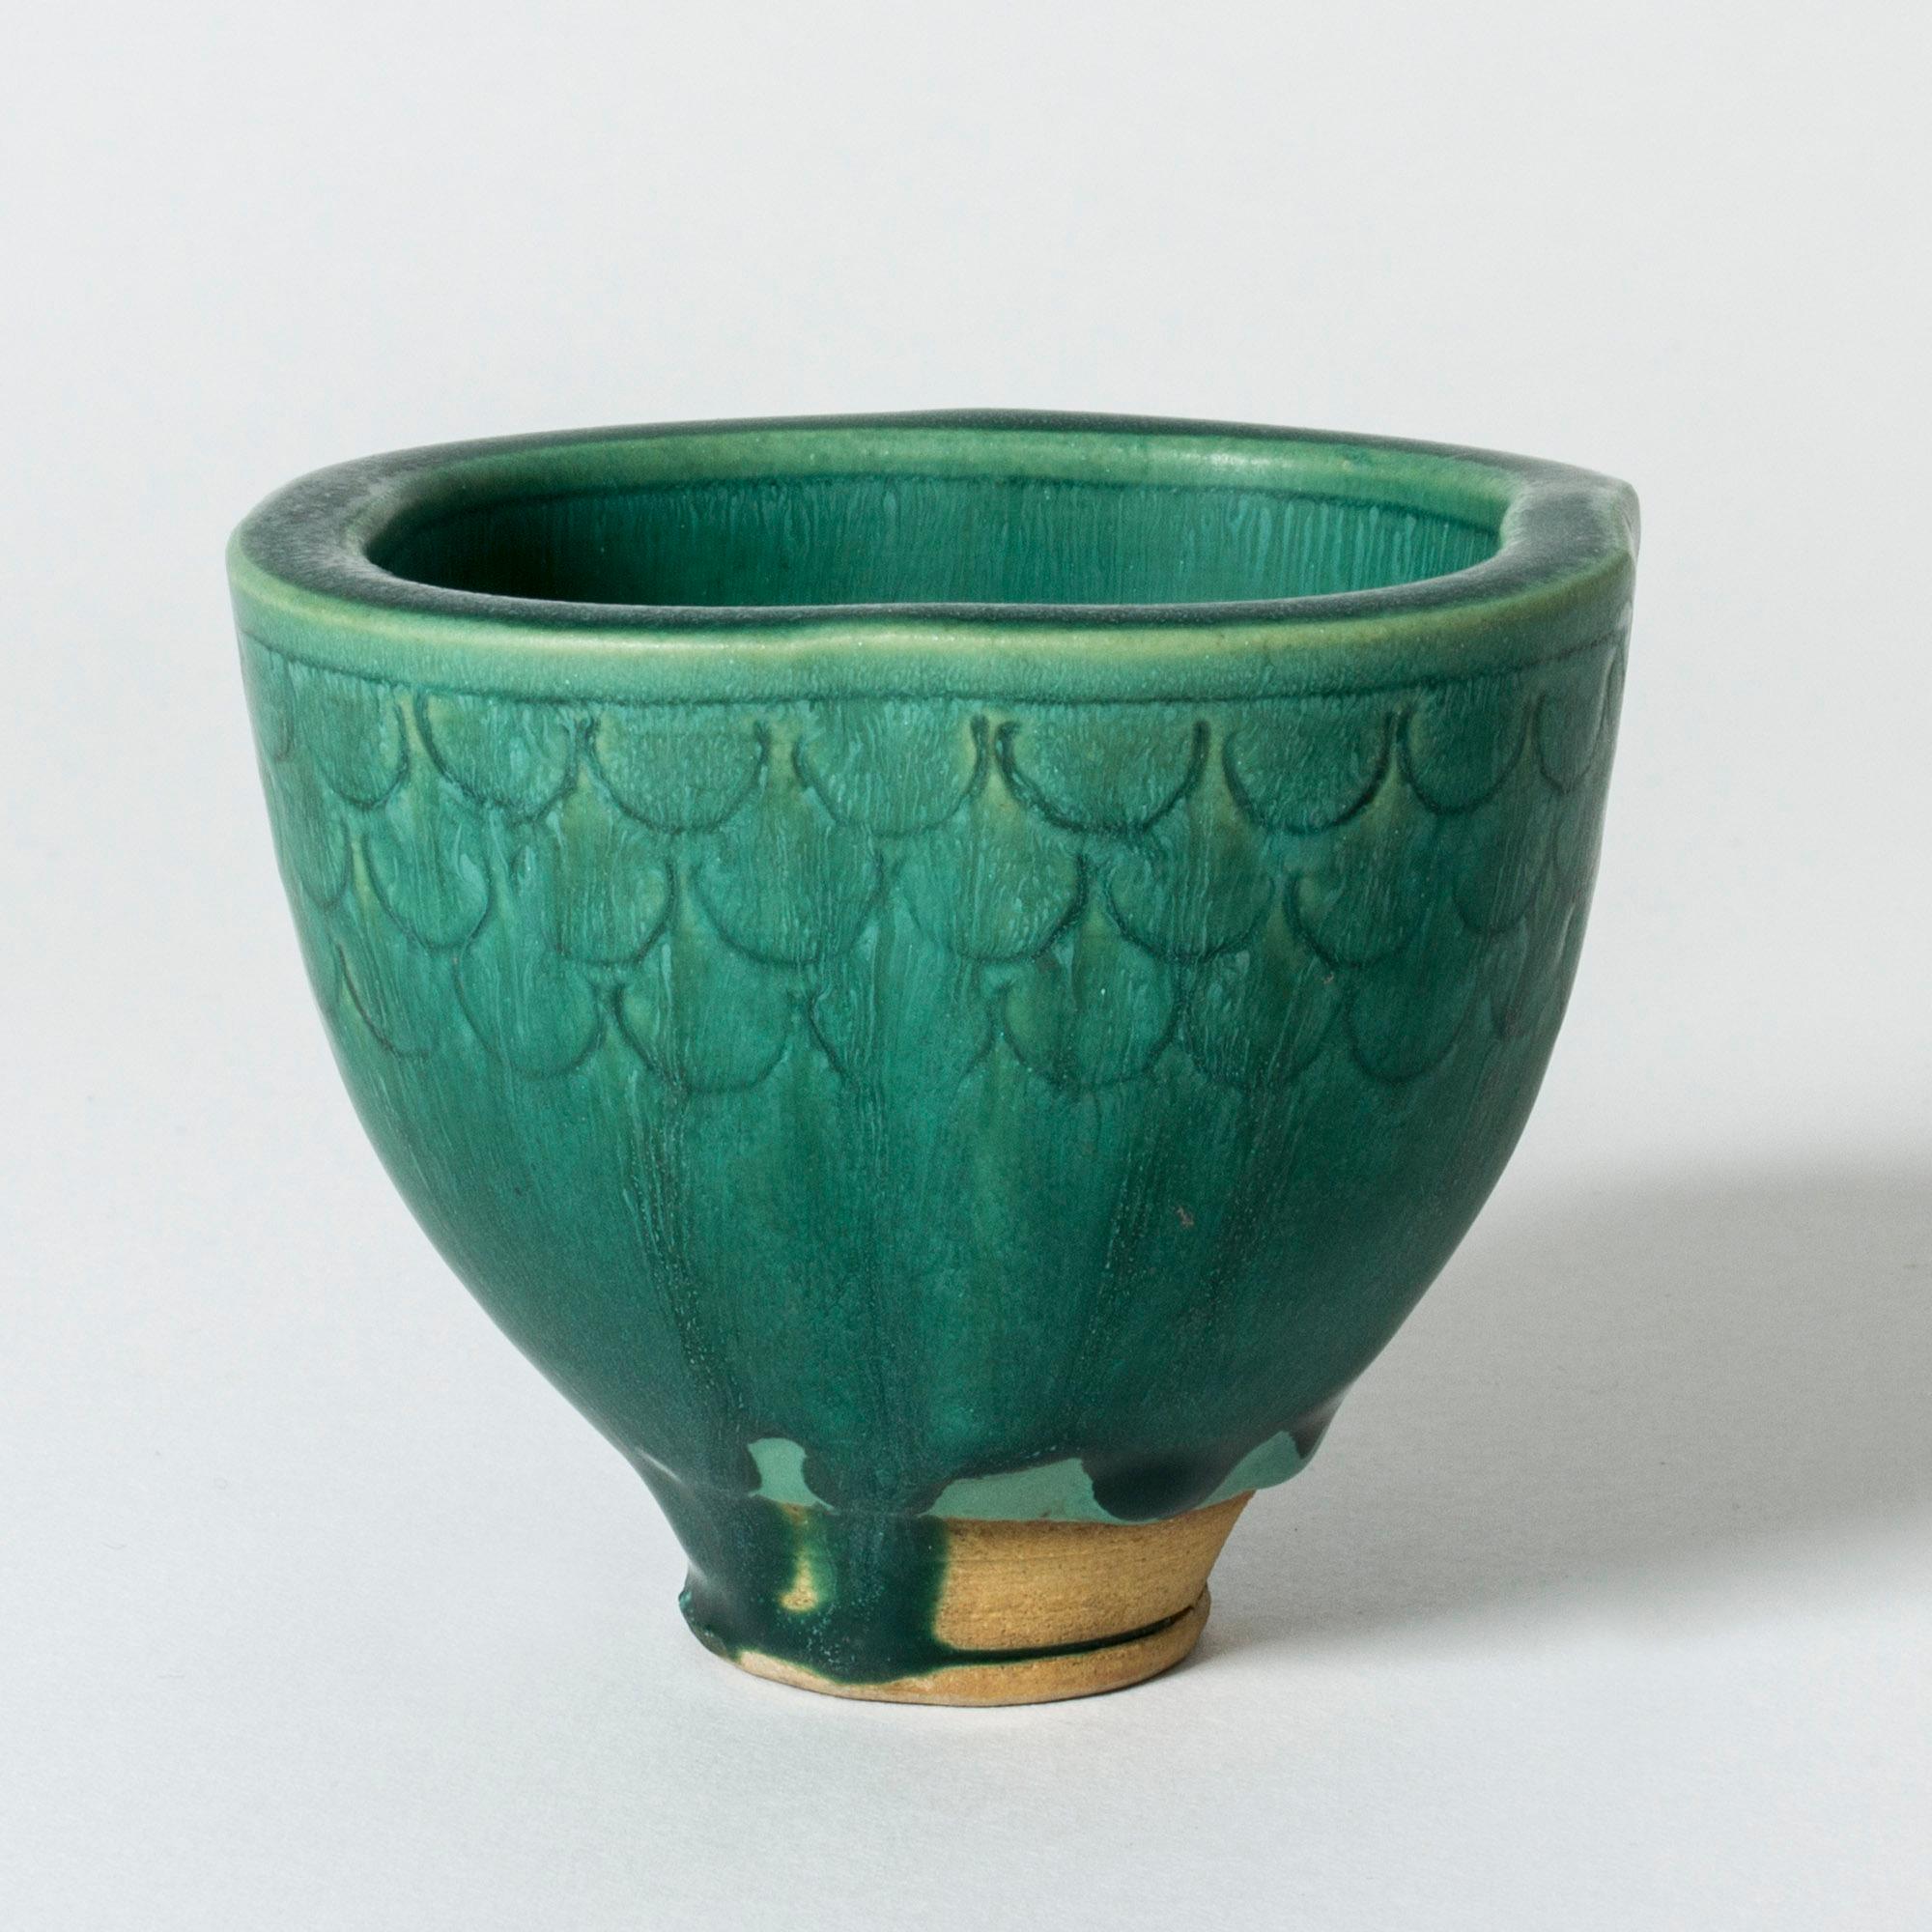 Lovely “Farsta” vase by Wilhelm Kåge in a small design with thick sides. Beautiful scalloped pattern and rich green glaze running over the body, gathering in drops around the base.

“Farsta” stoneware is recognized as being the best and most